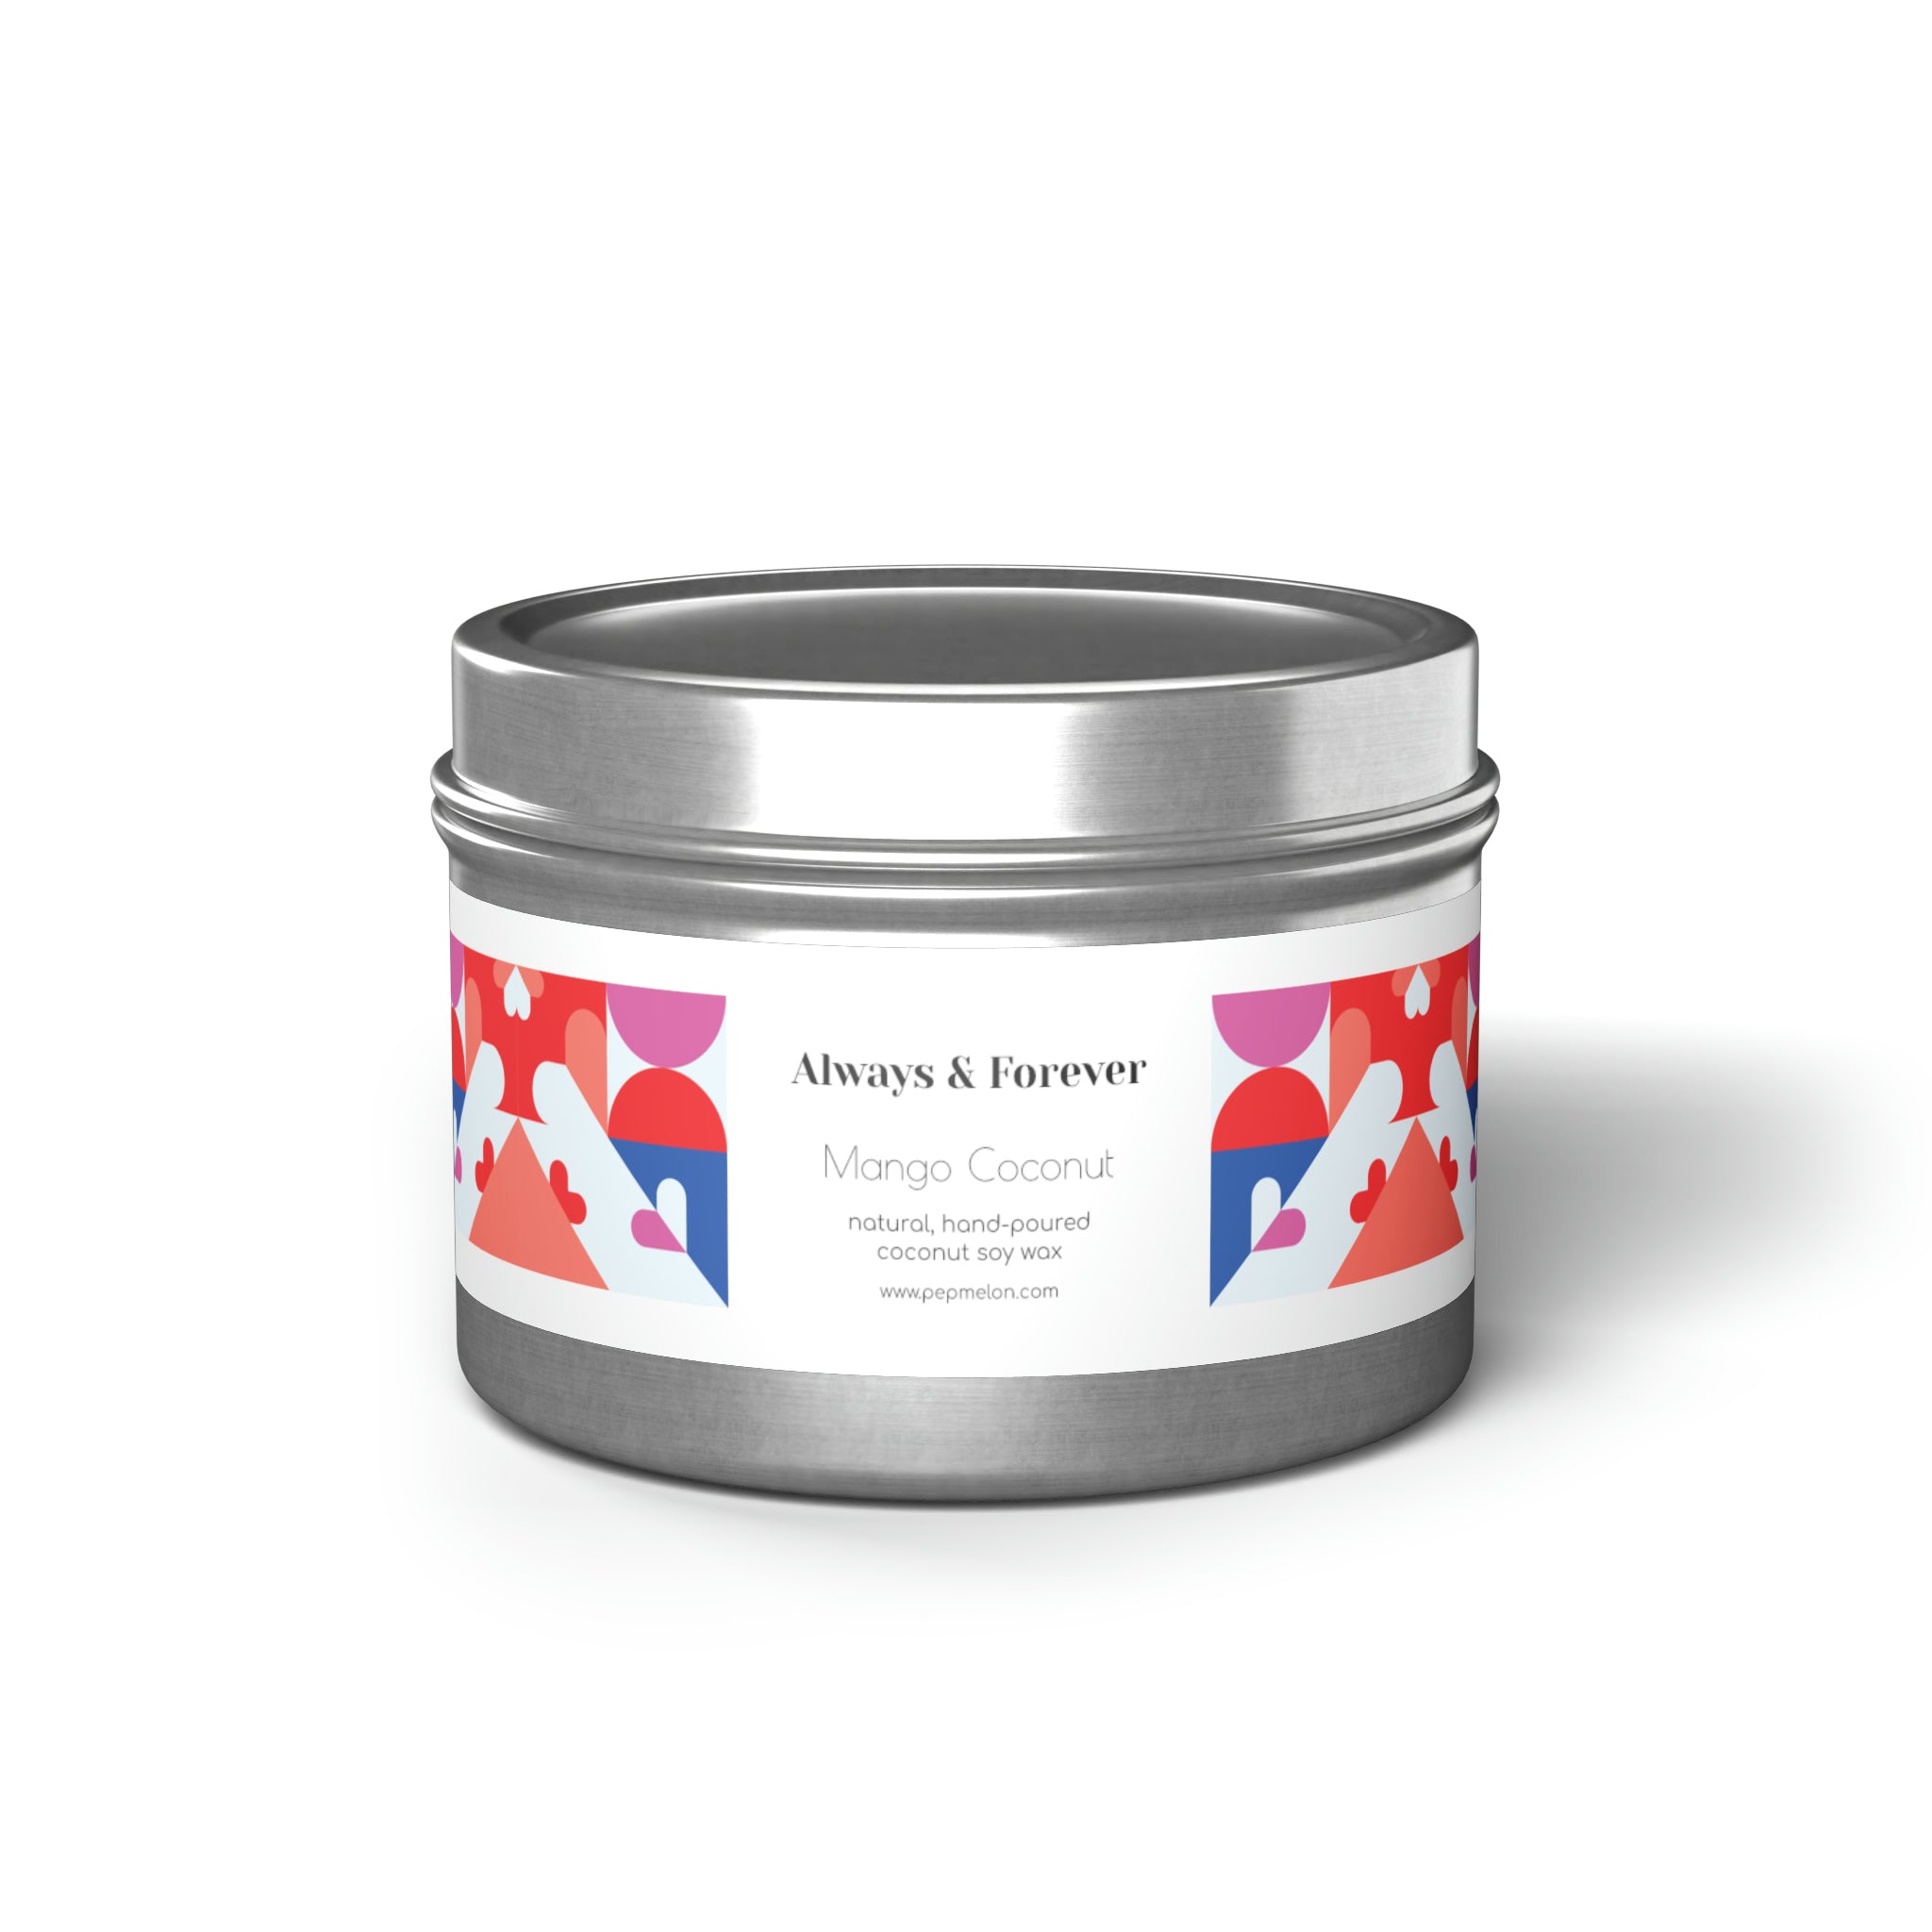 Mango Coconut Always & Forever scentedTin Candle-4